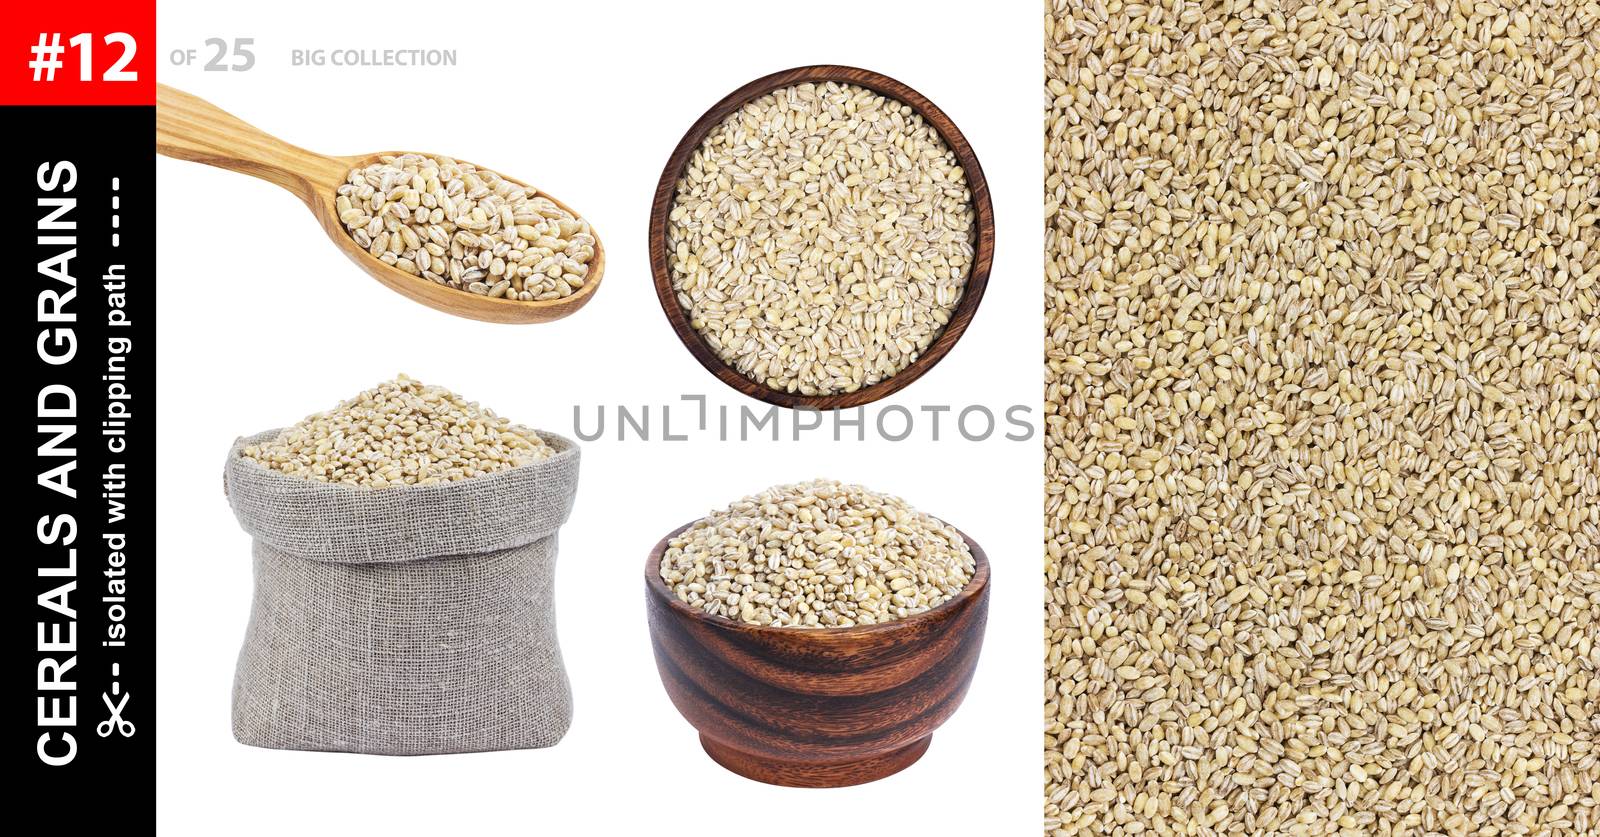 Pearl barley in different dishware isolated on white background, pearl barley grains in bowl, spoon and bag, collection